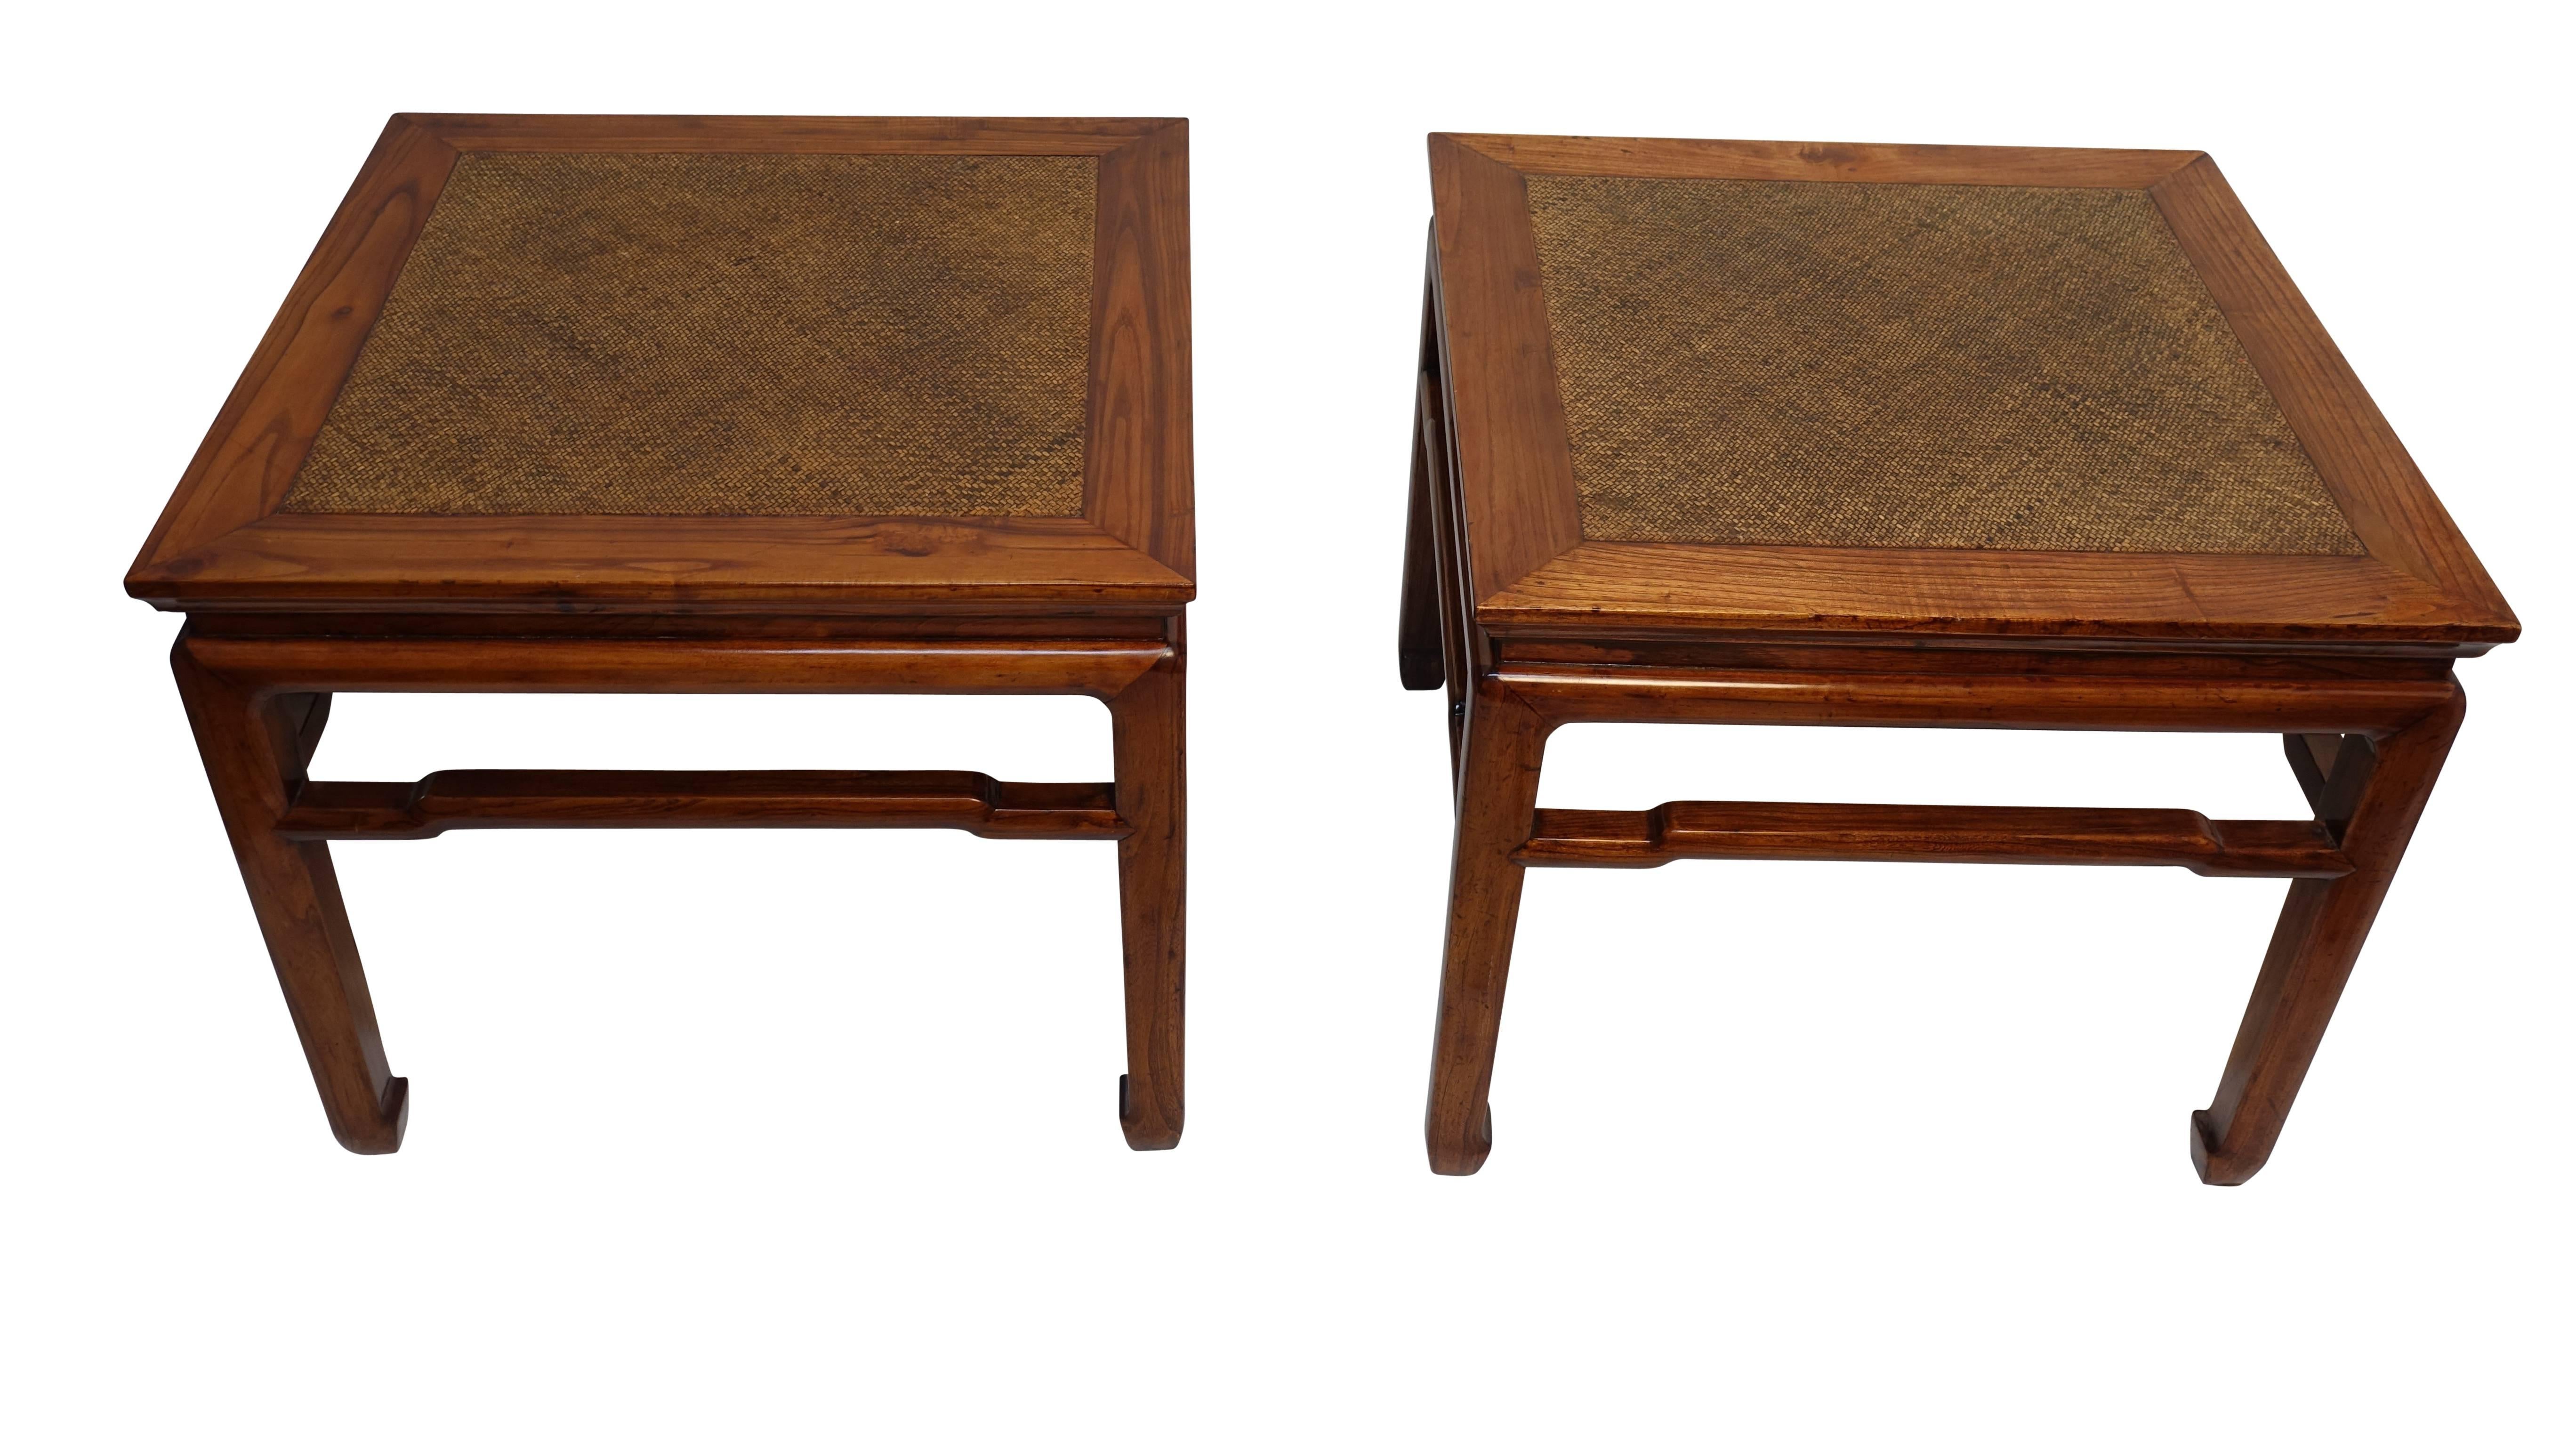 Pair of Chinese Side or End Tables with Woven Panels, Mid-19th Century 7